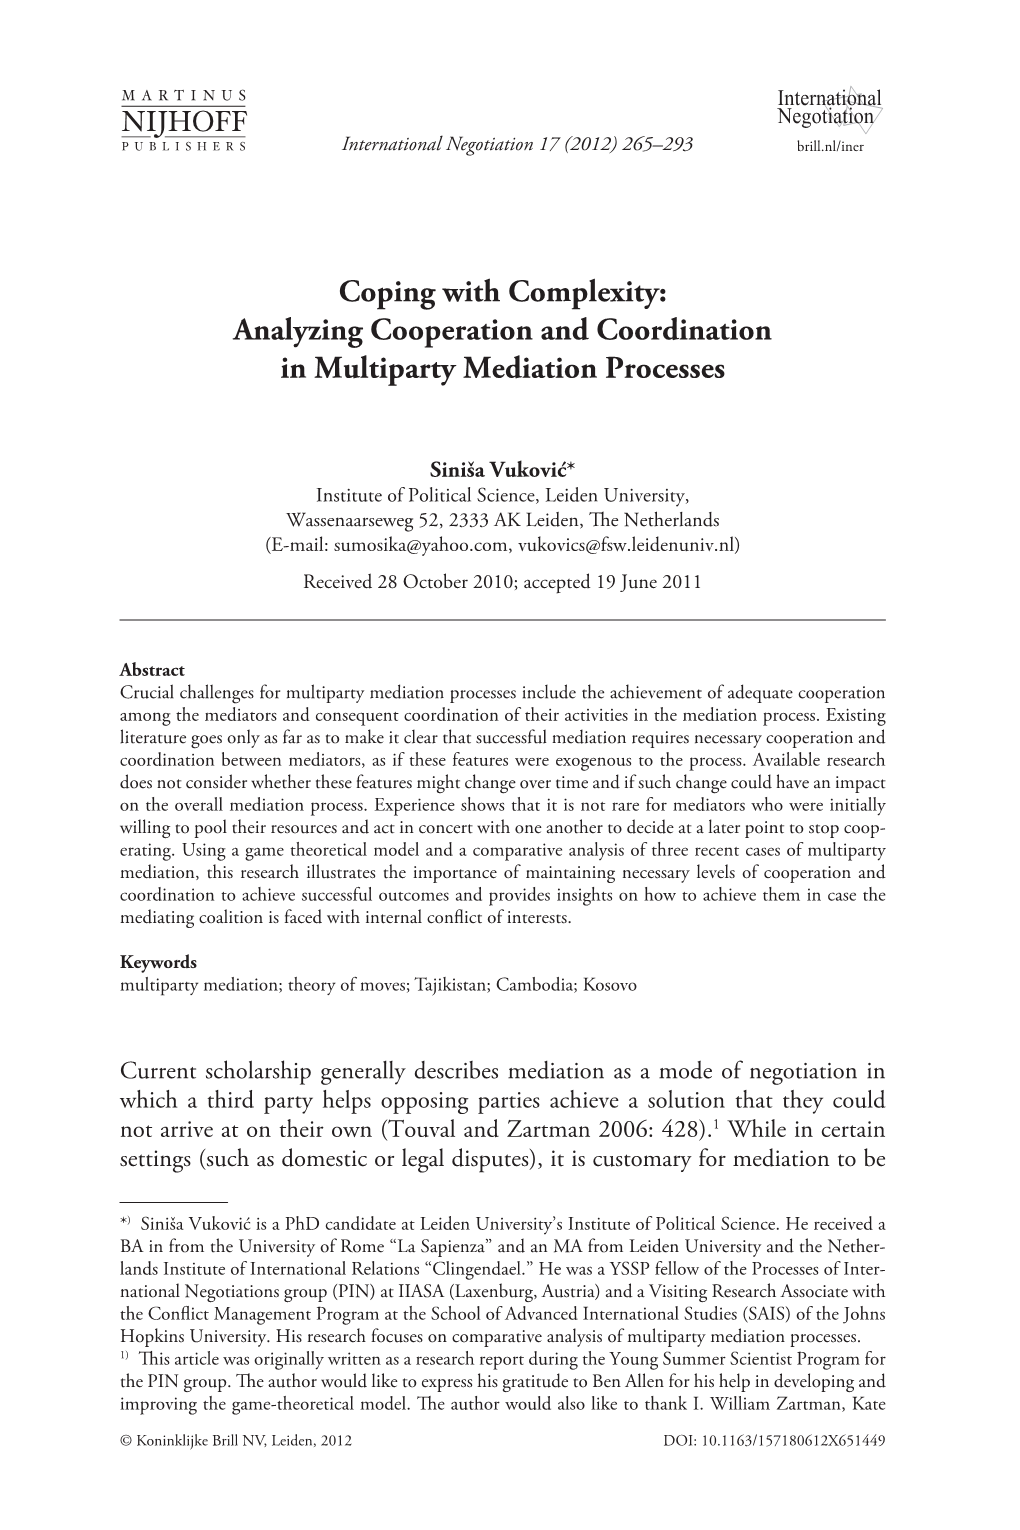 Coping with Complexity: Analyzing Cooperation and Coordination in Multiparty Mediation Processes